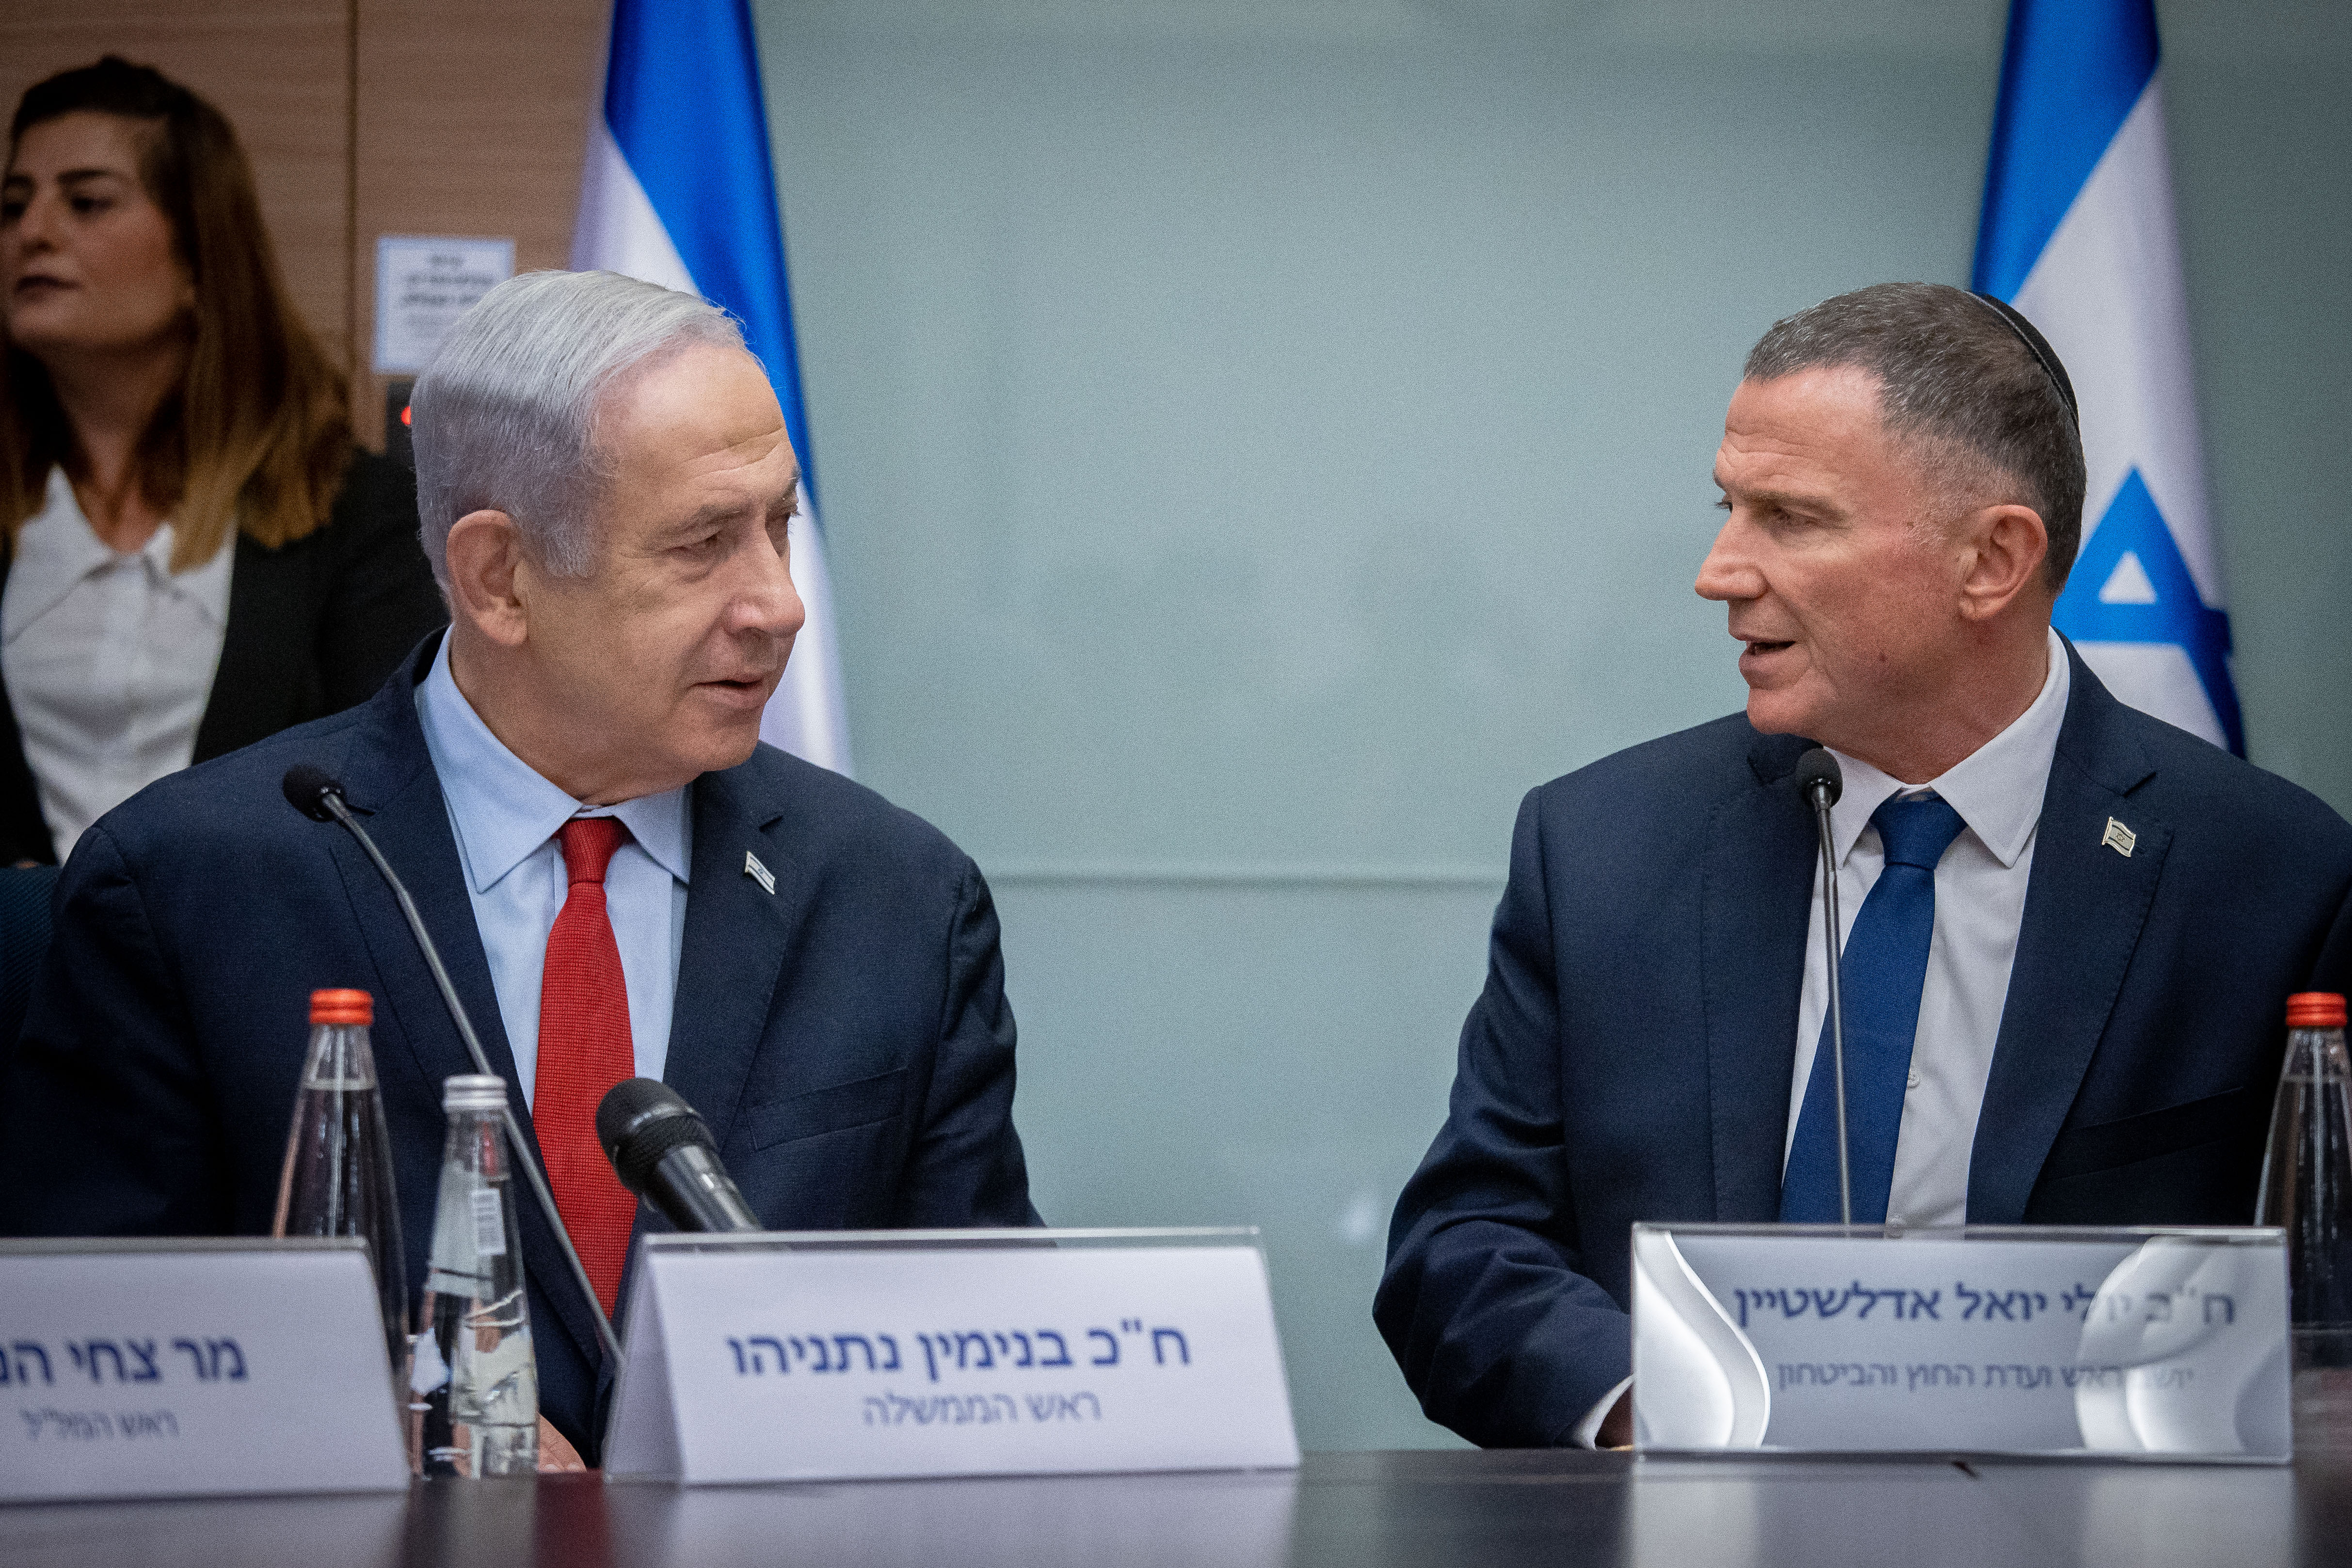 Fateful voting day in Knesset for judicial picks